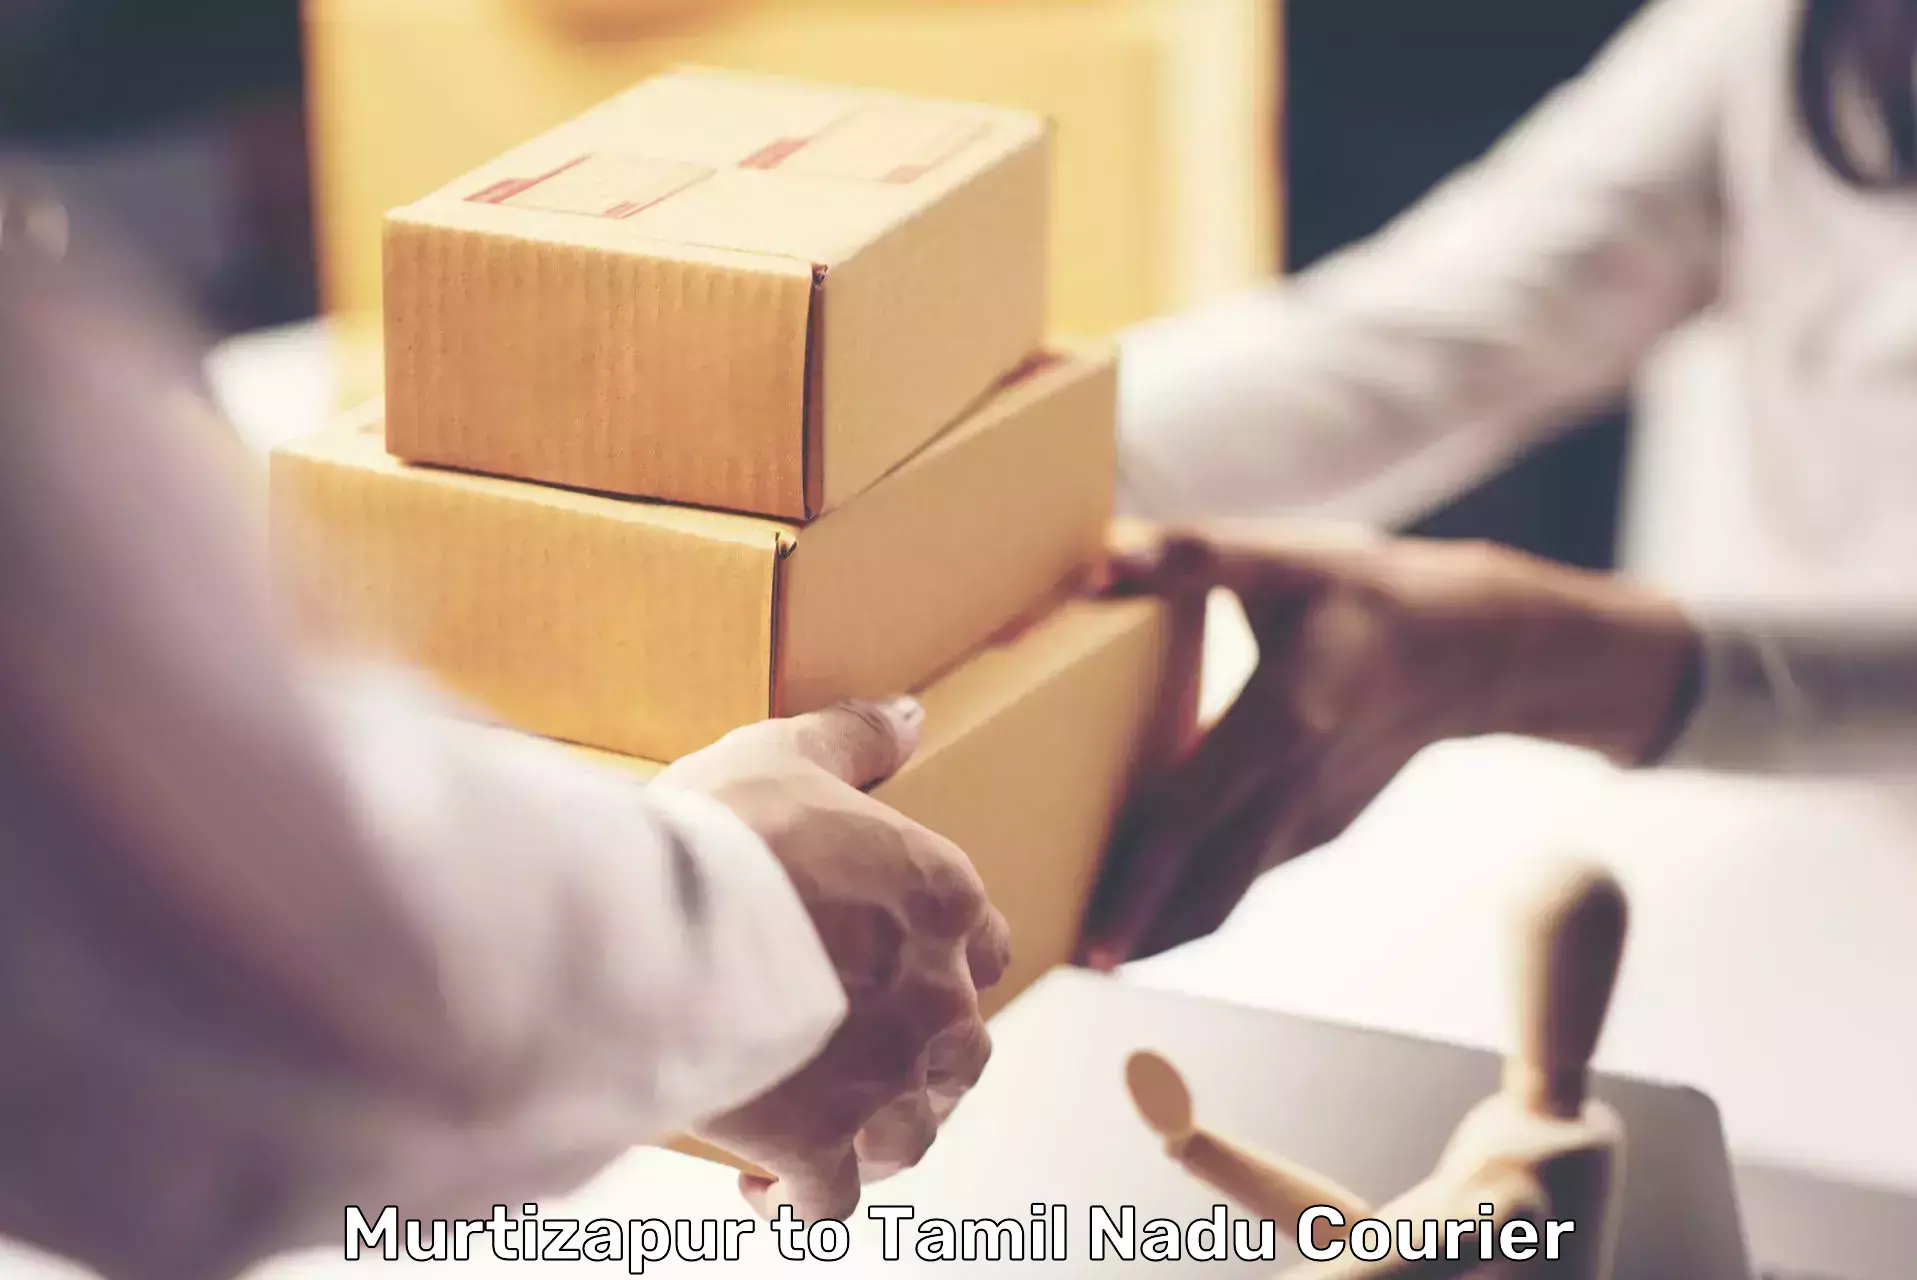 Parcel handling and care in Murtizapur to Tamil Nadu